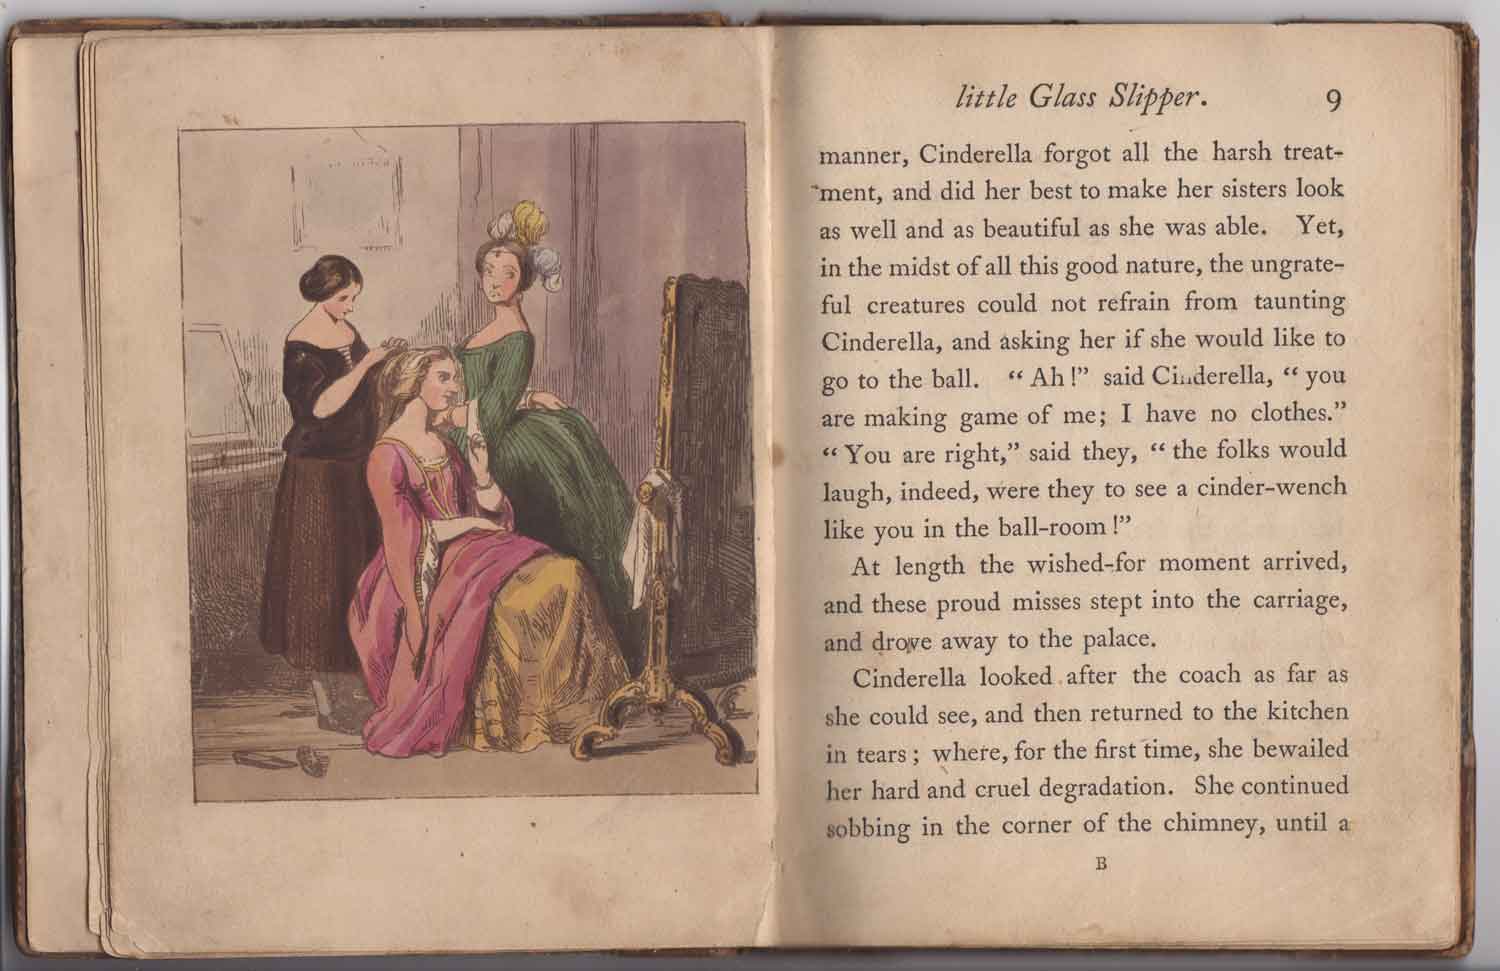 Cinderella book (from the collection book) 1845 illustration 2 Cinderella connecting the hairy sister's hair